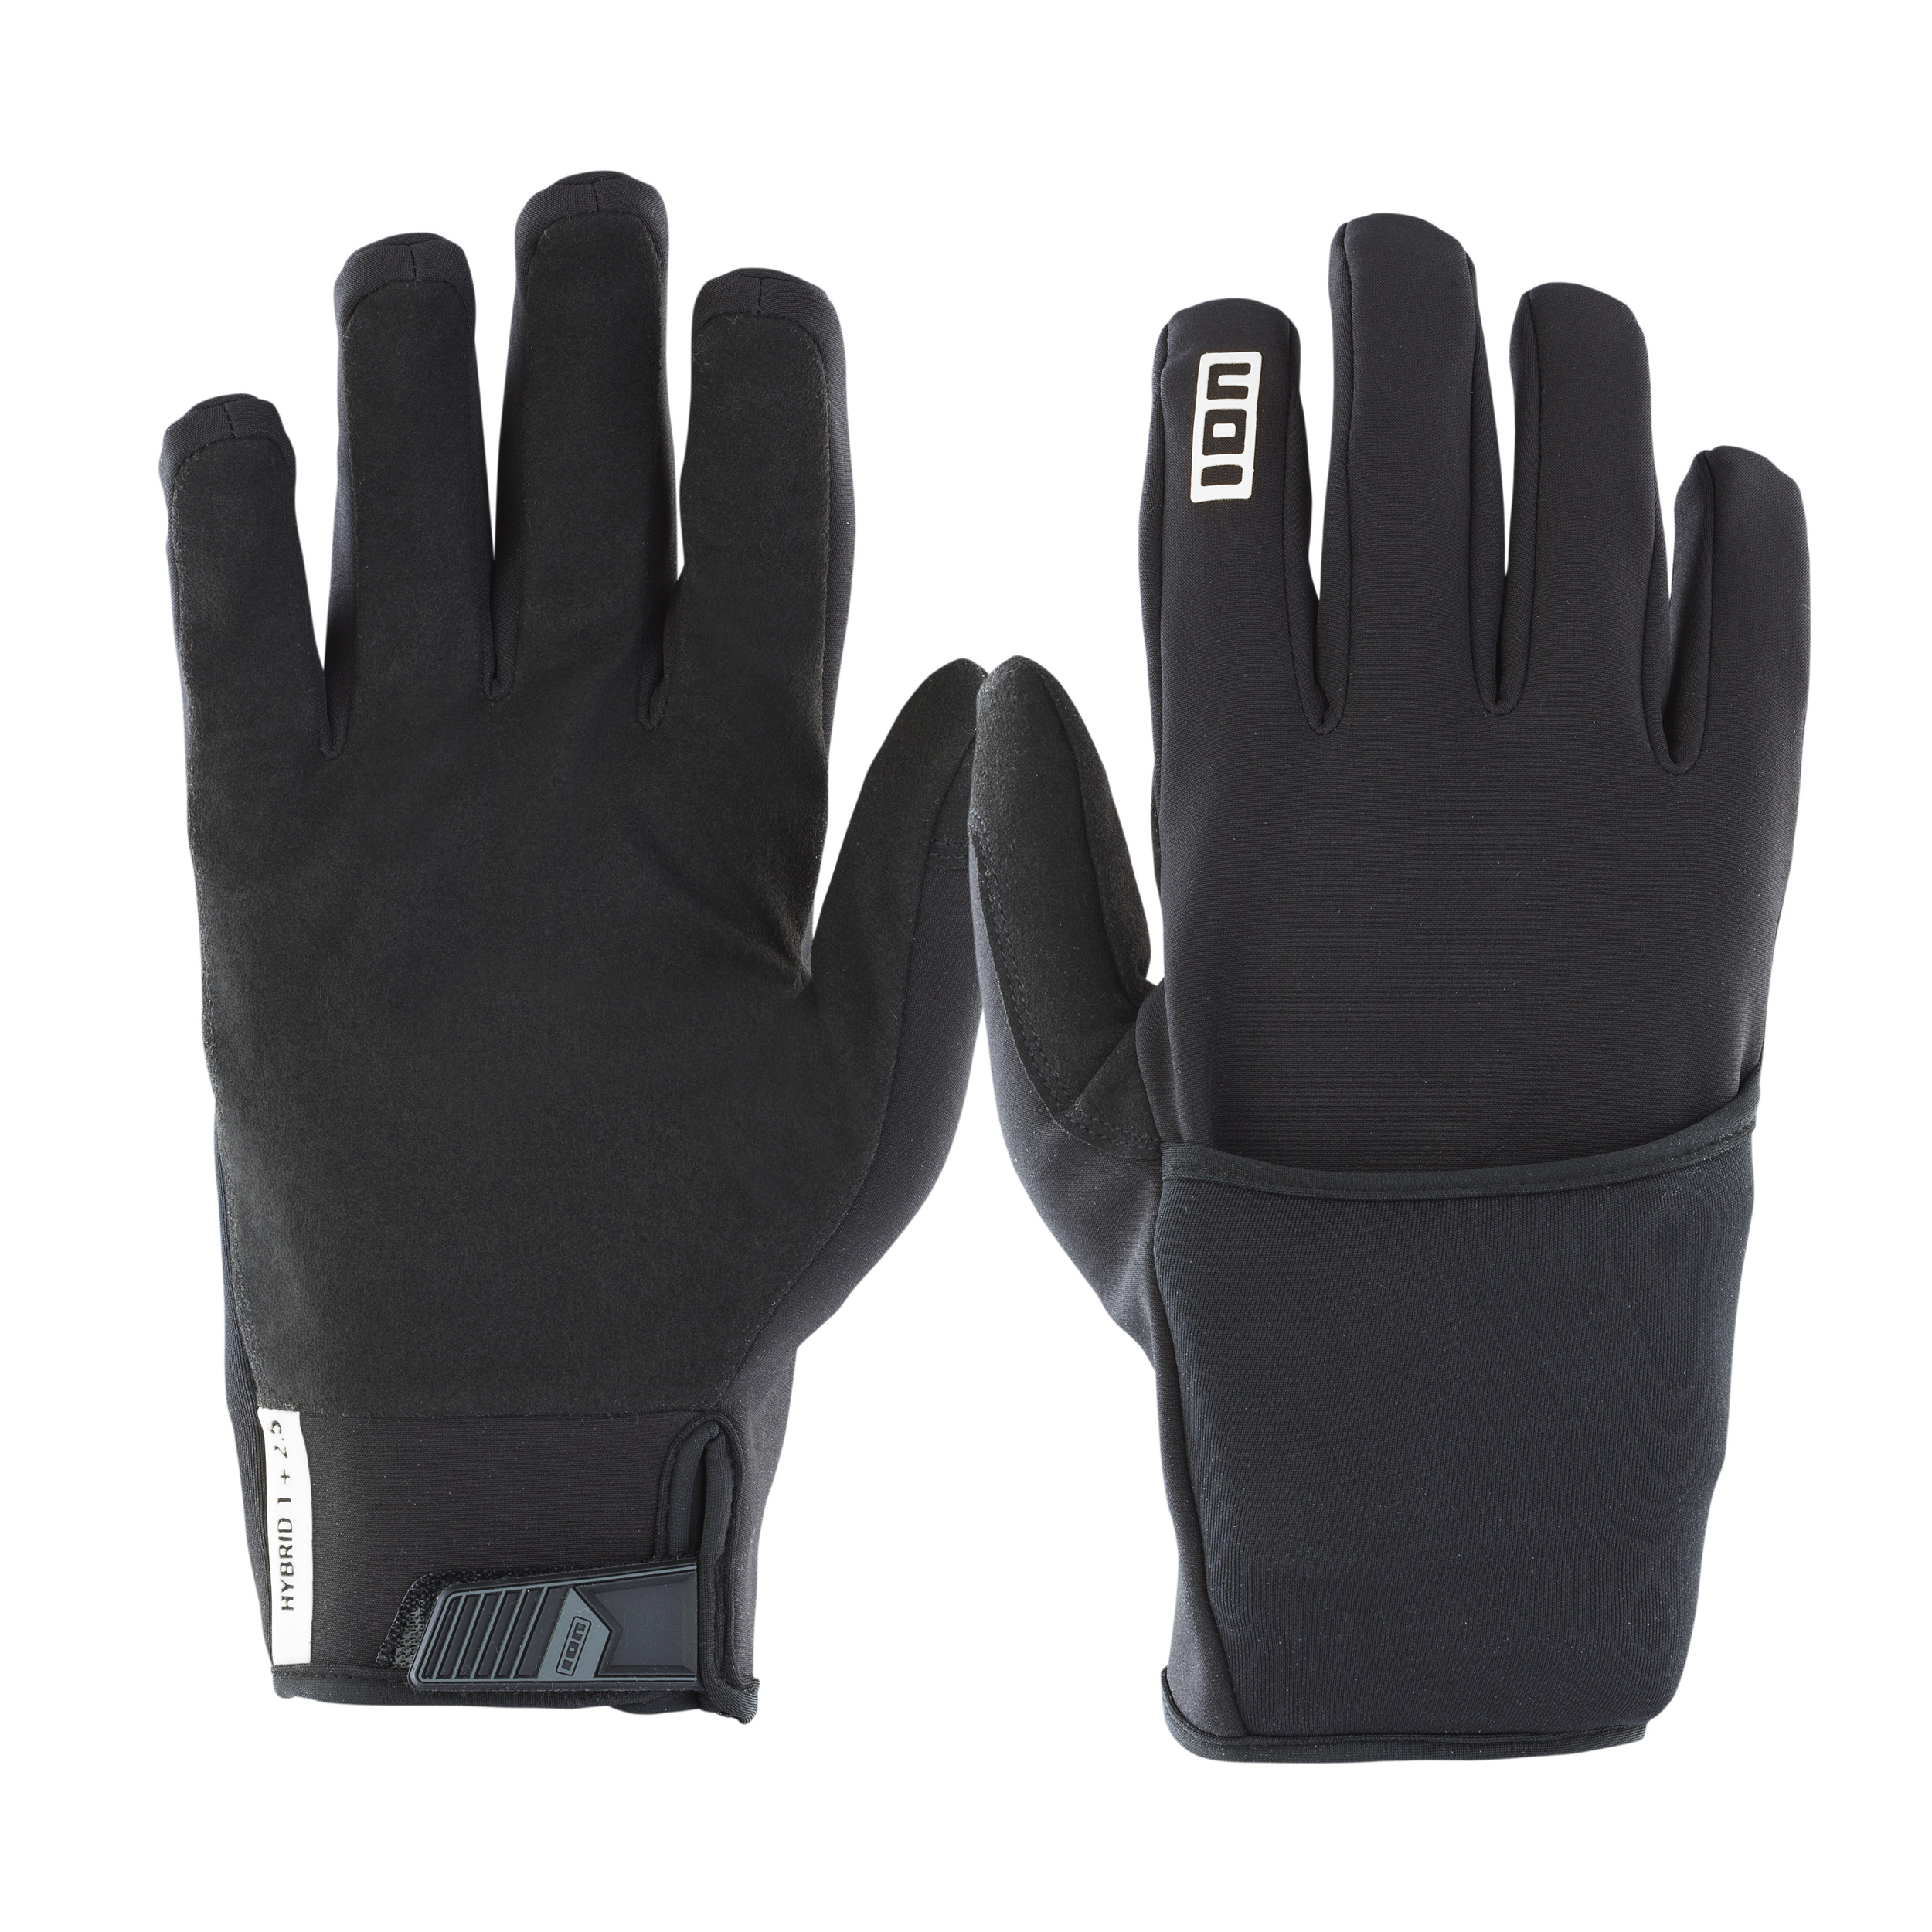 ION - Water Gloves Hybrid Gloves 1+2.5 NEW (48230-4148)  24 (46/XS)-